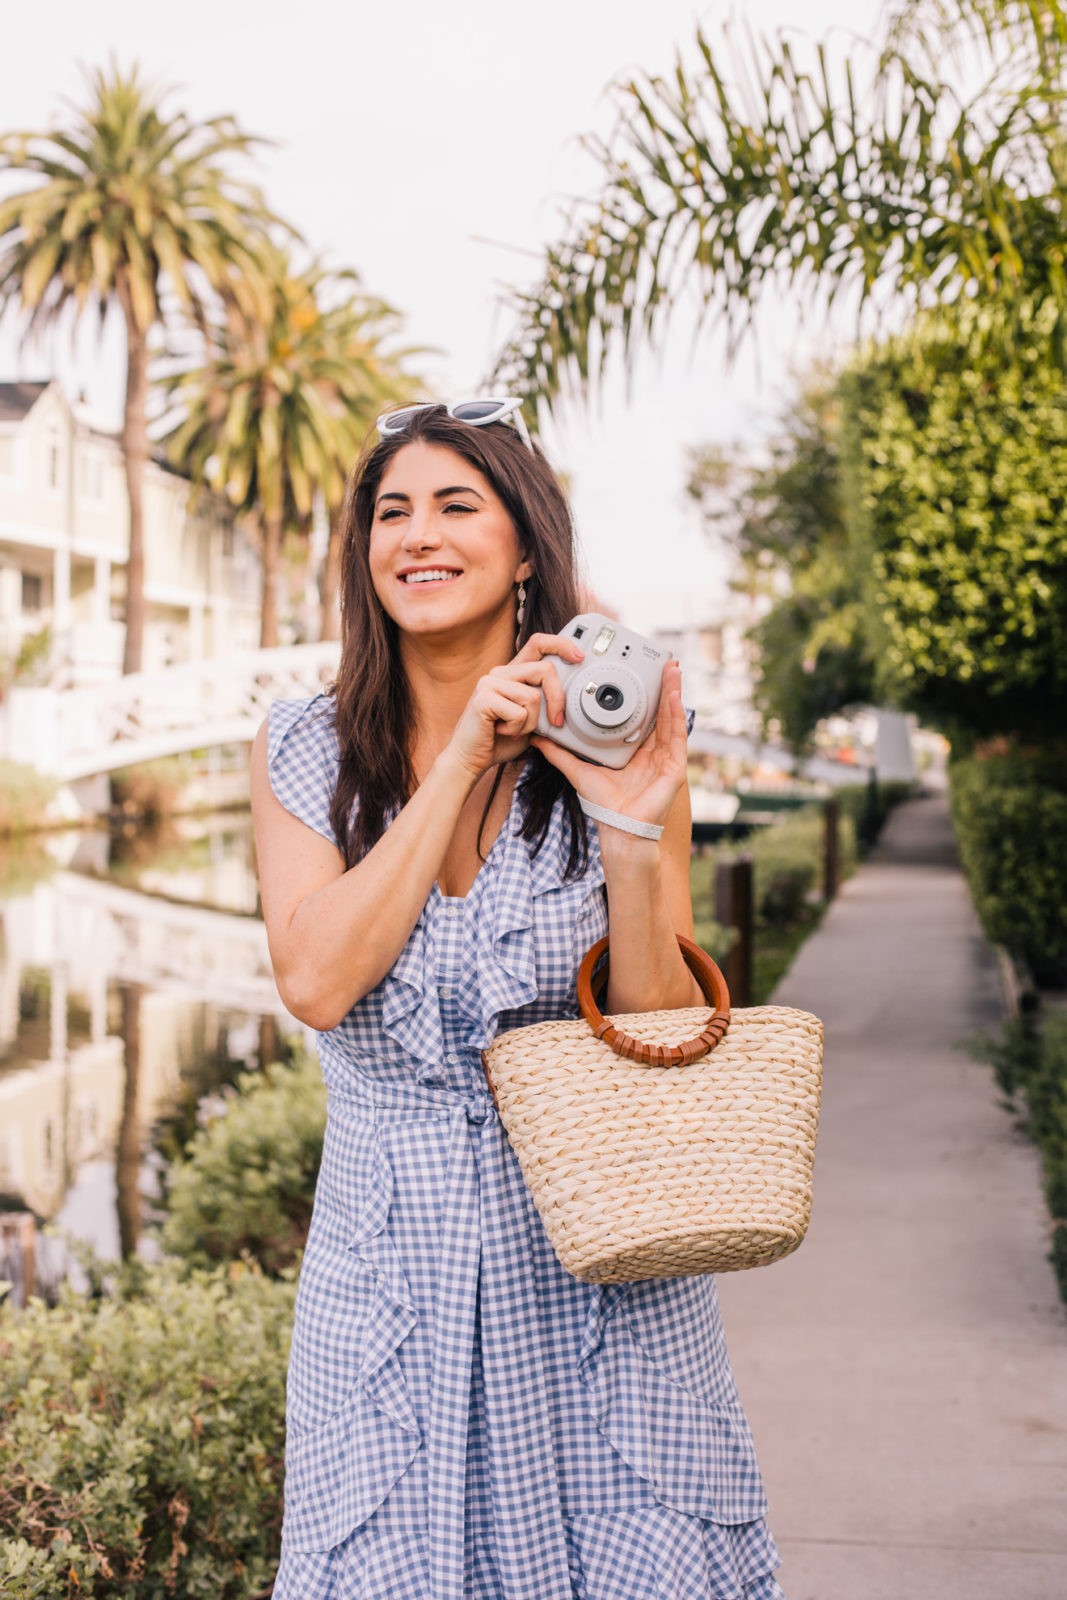 Stage Summer Moments, 2019 Summer Bucket List Moments by popular Los Angeles Lifestyle Blogger Laura Lily: image of woman next to Venice, California canals holding a gray Polaroid Instax camera and wearing a blue and white gingham ruffle wrap dress, white sunglasses and holding a straw tote. 